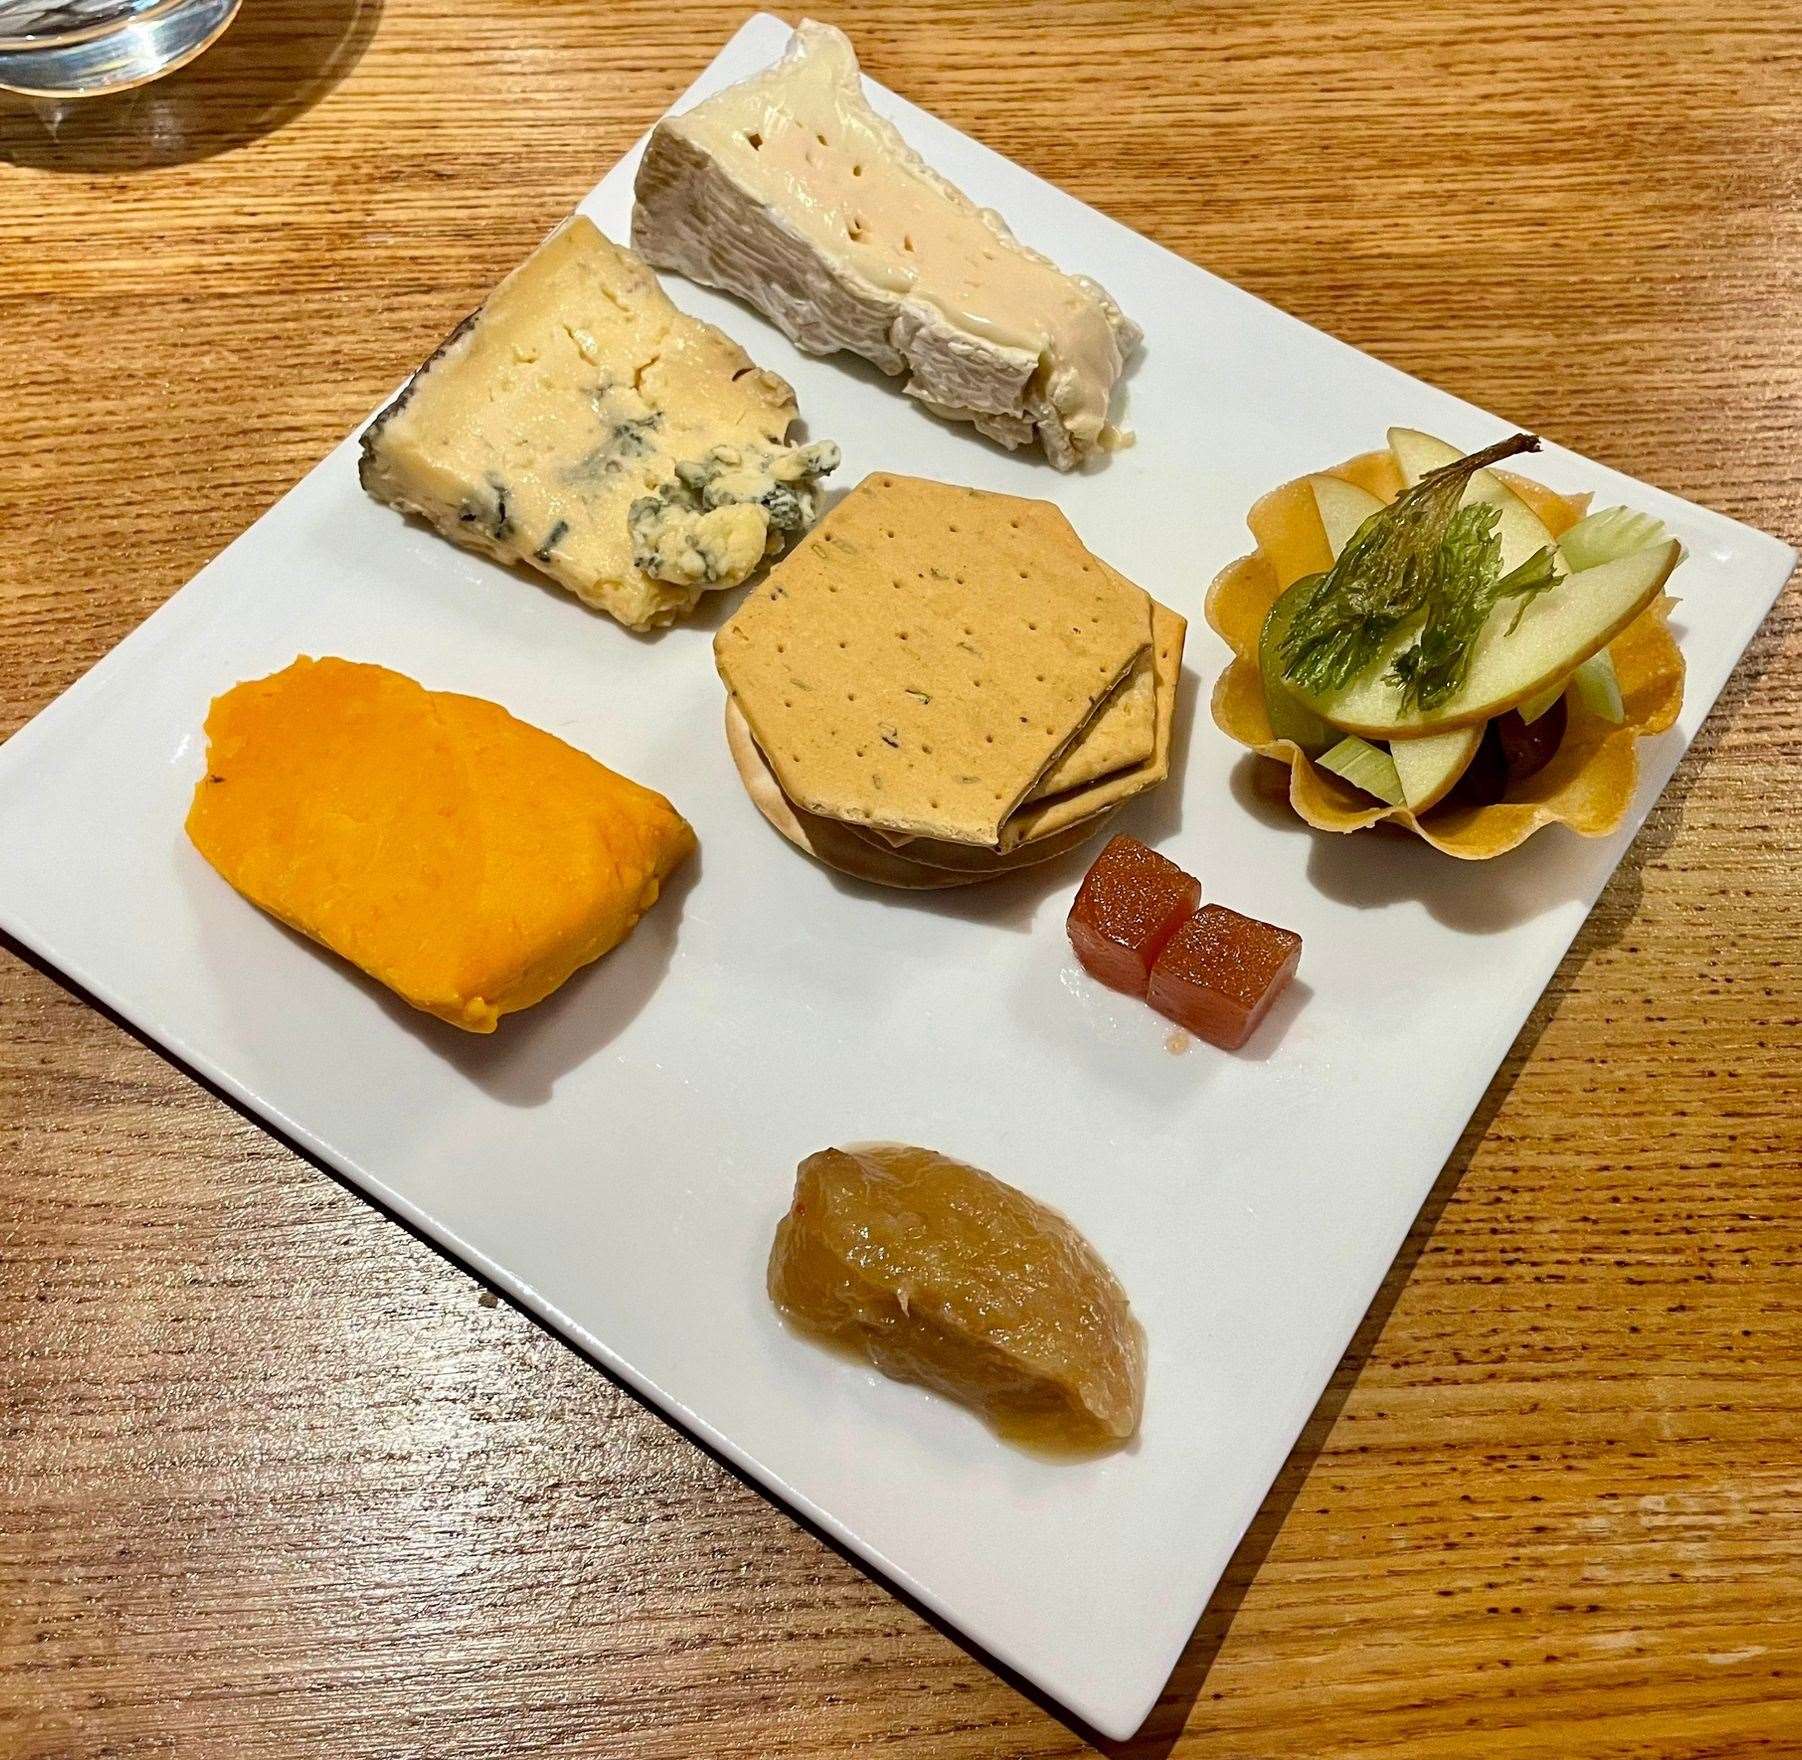 The Baron Bigod, Suffolk Blue and Red Storm cheeses. Picture: Chantelle Hurst